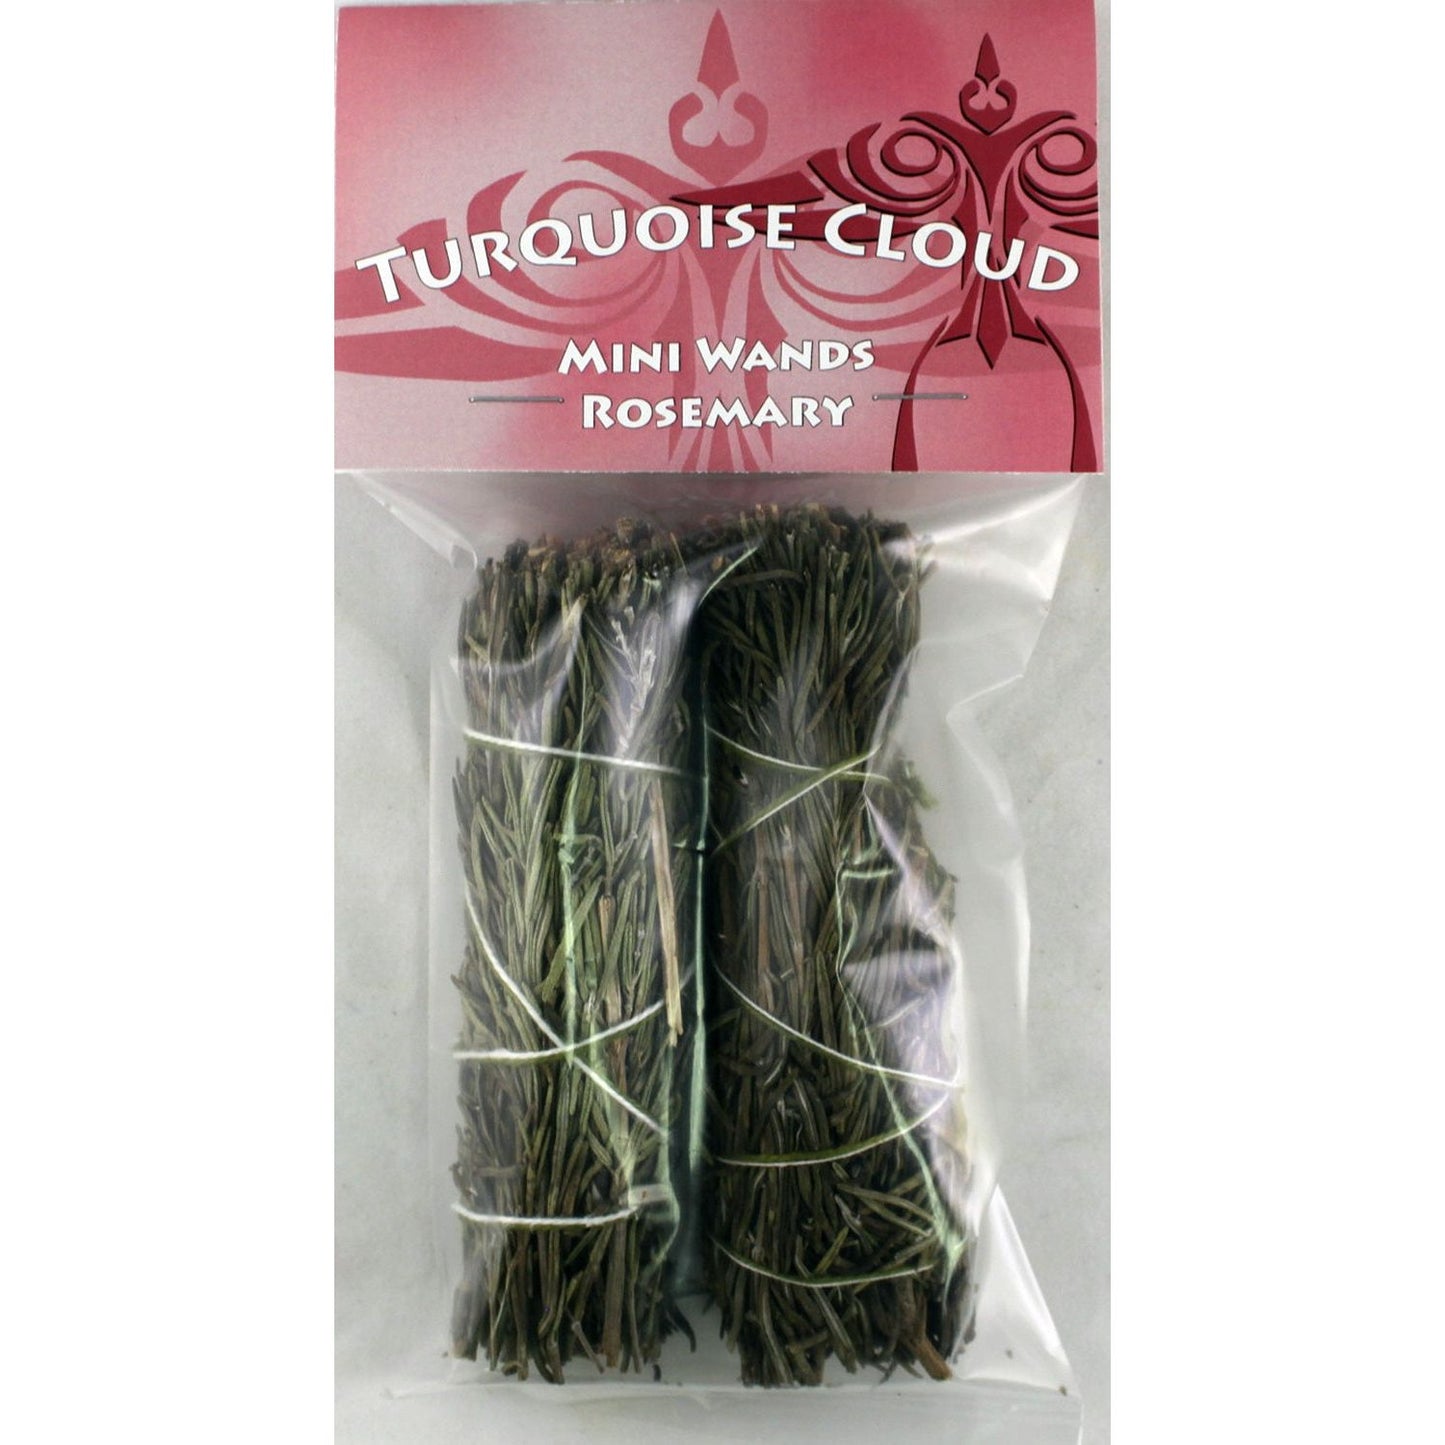 Turquoise Cloud Native American Products - Sage Wands, Rosemary